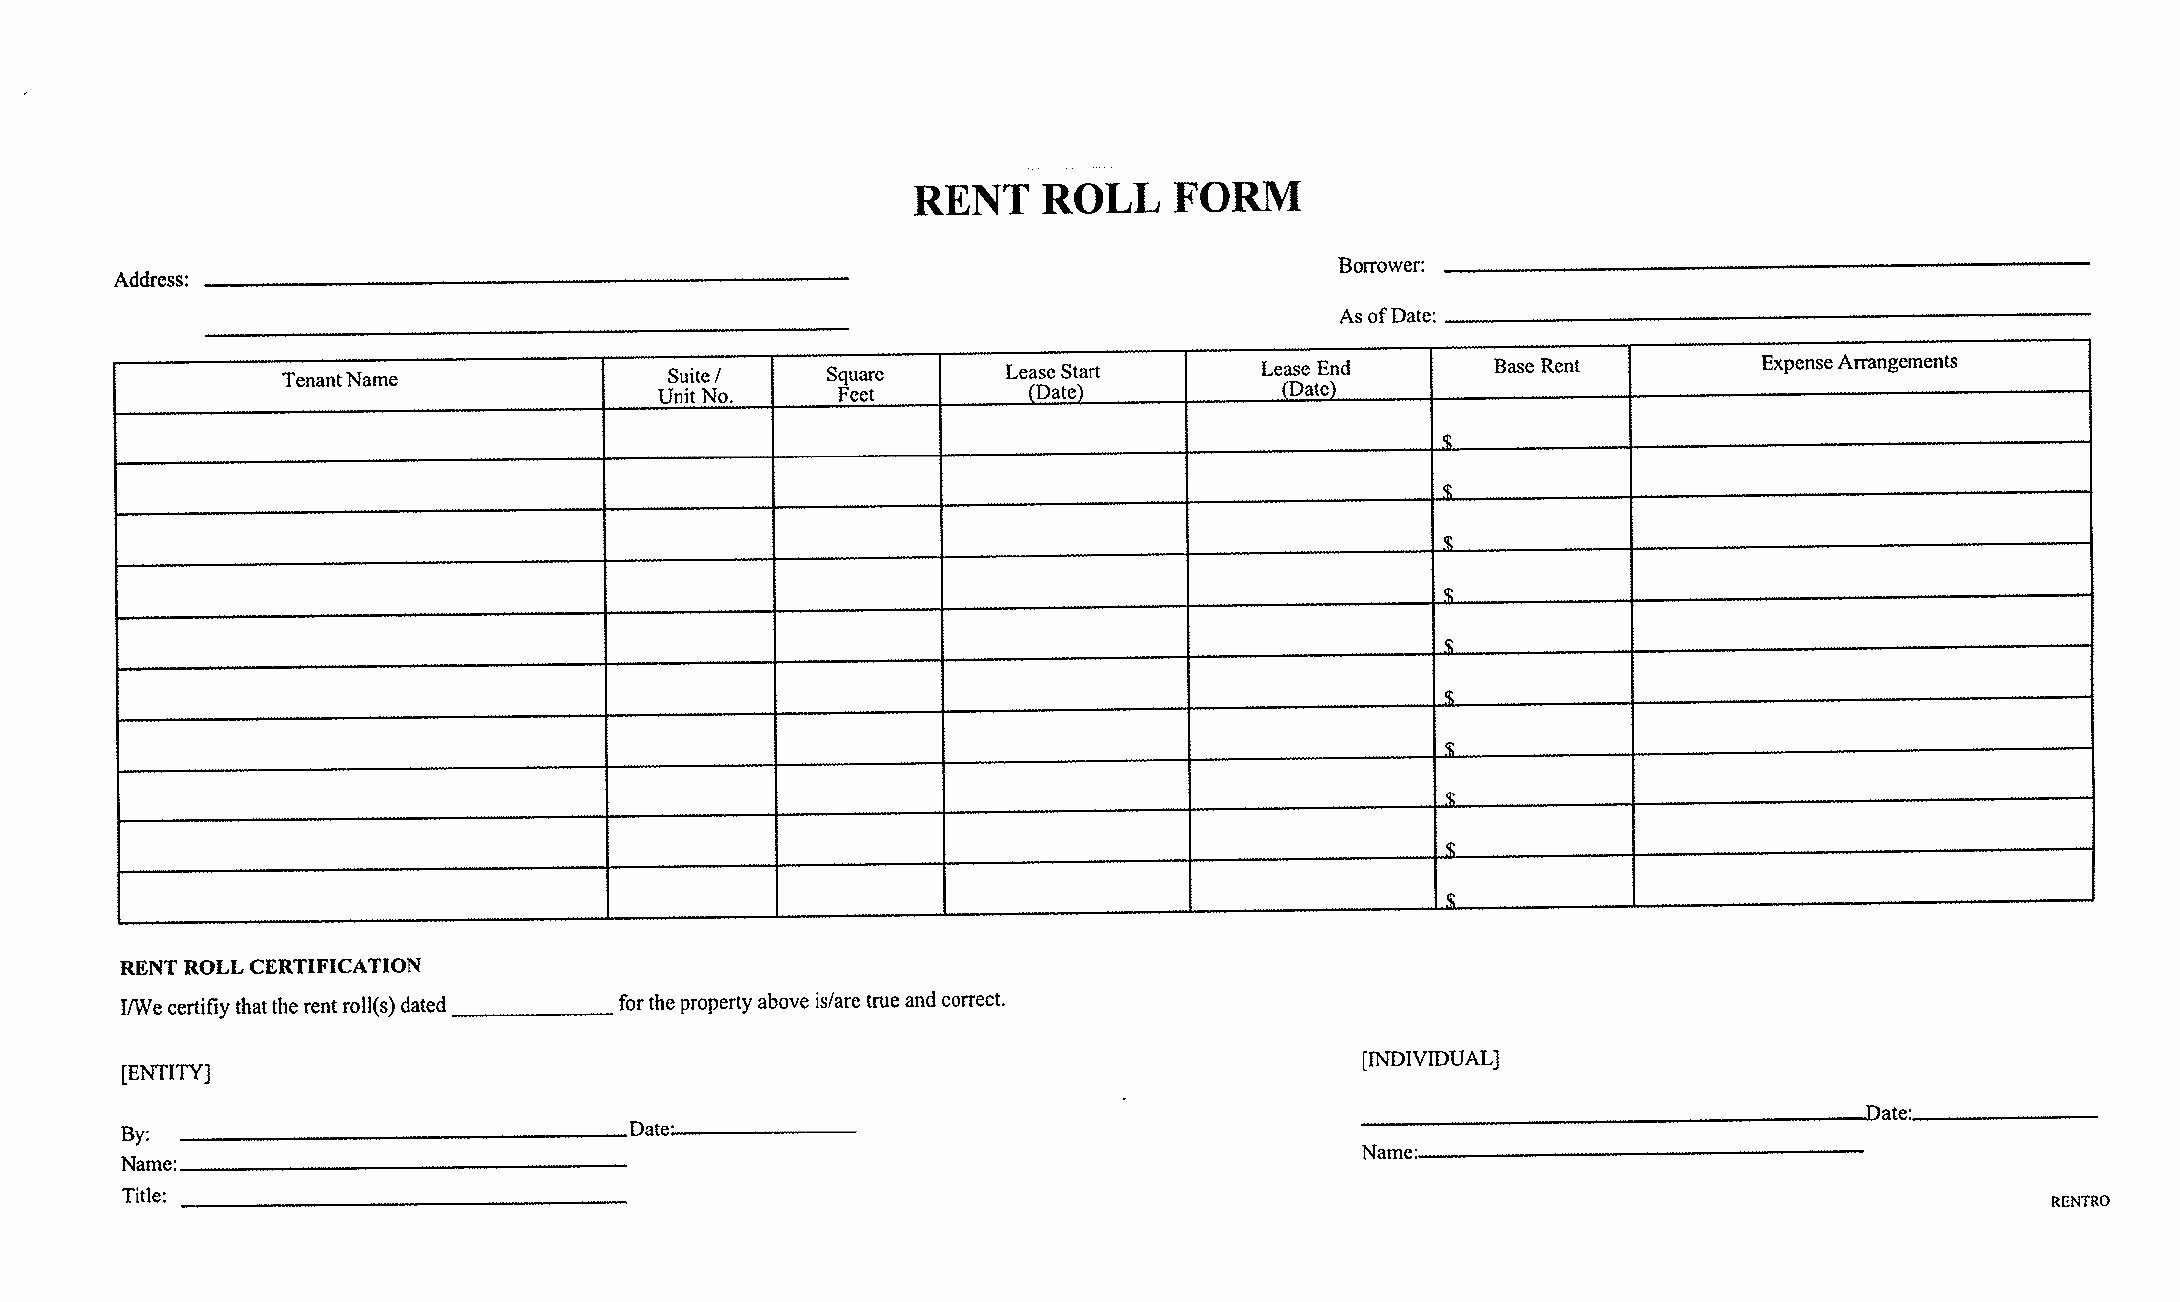 50 New Simple Rent Roll Template DOCUMENTS IDEAS